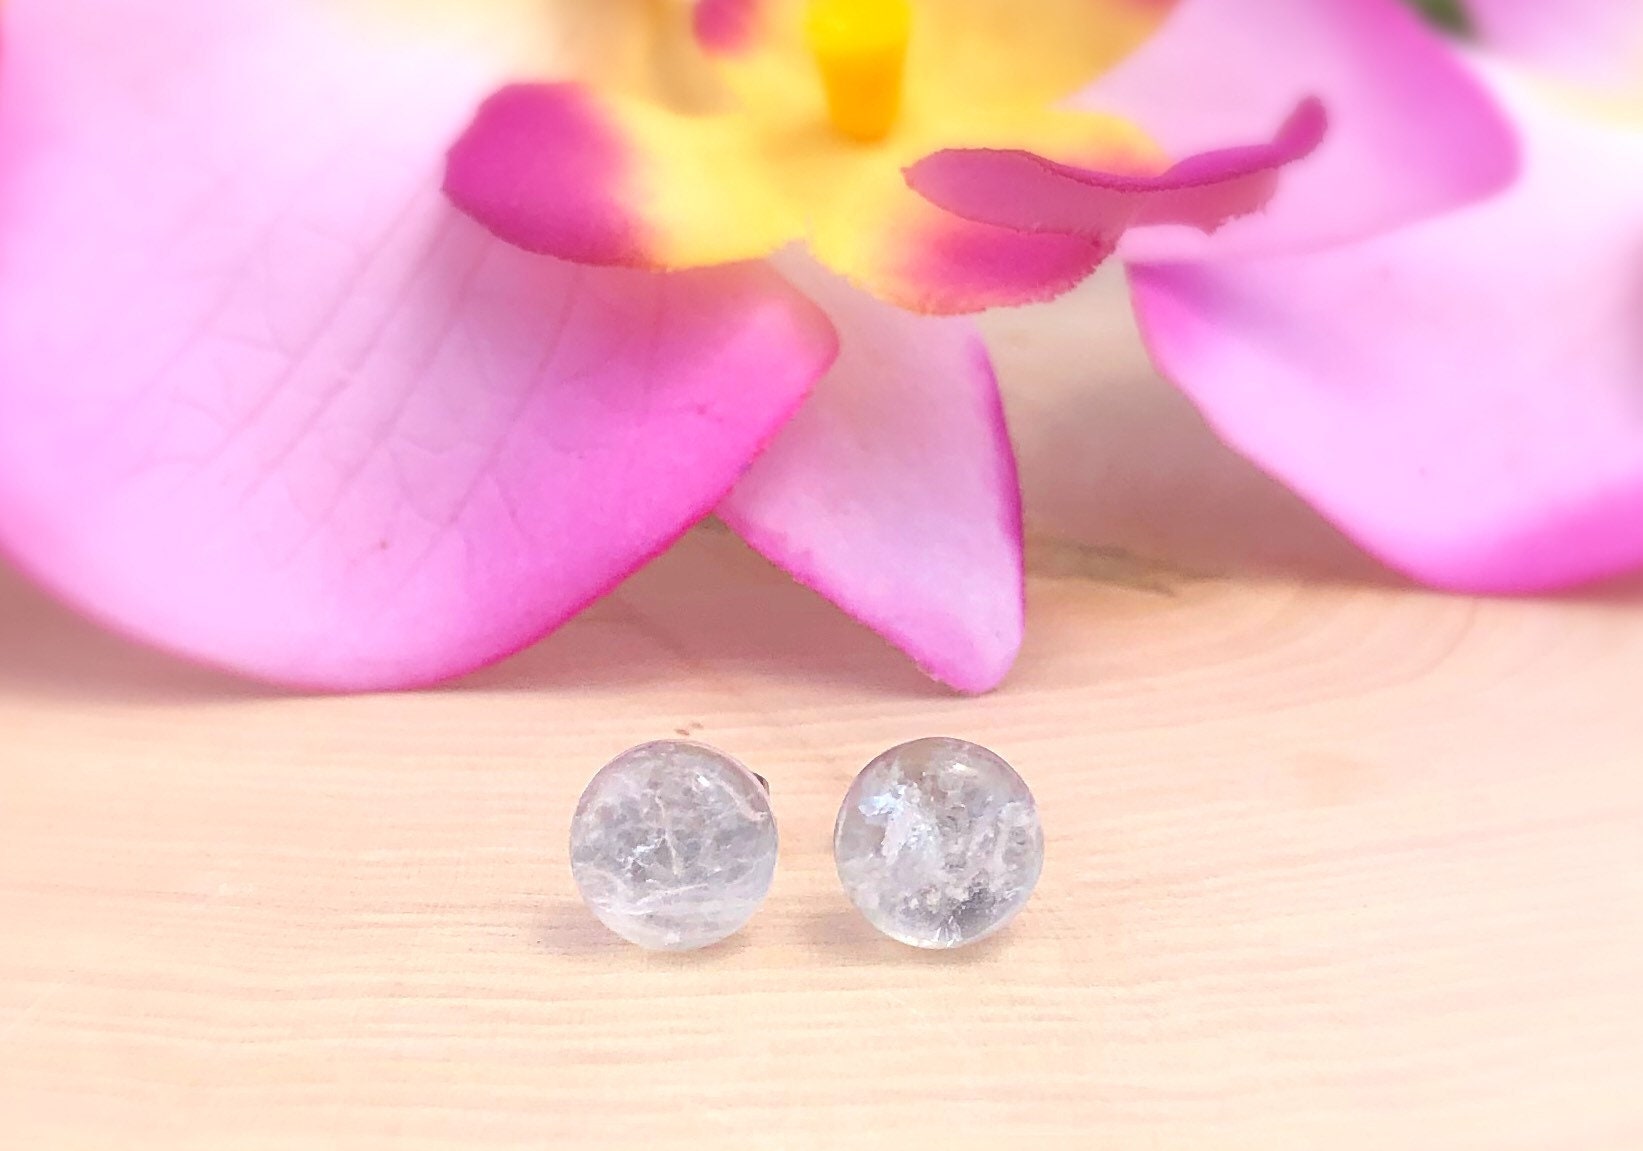 Clear Crystal Stud Earrings Large European Clear Post Earrings Clear 14mm Bridesmaids Gift Bridal White Wedding Jewelry,Silver,Clear,SE113